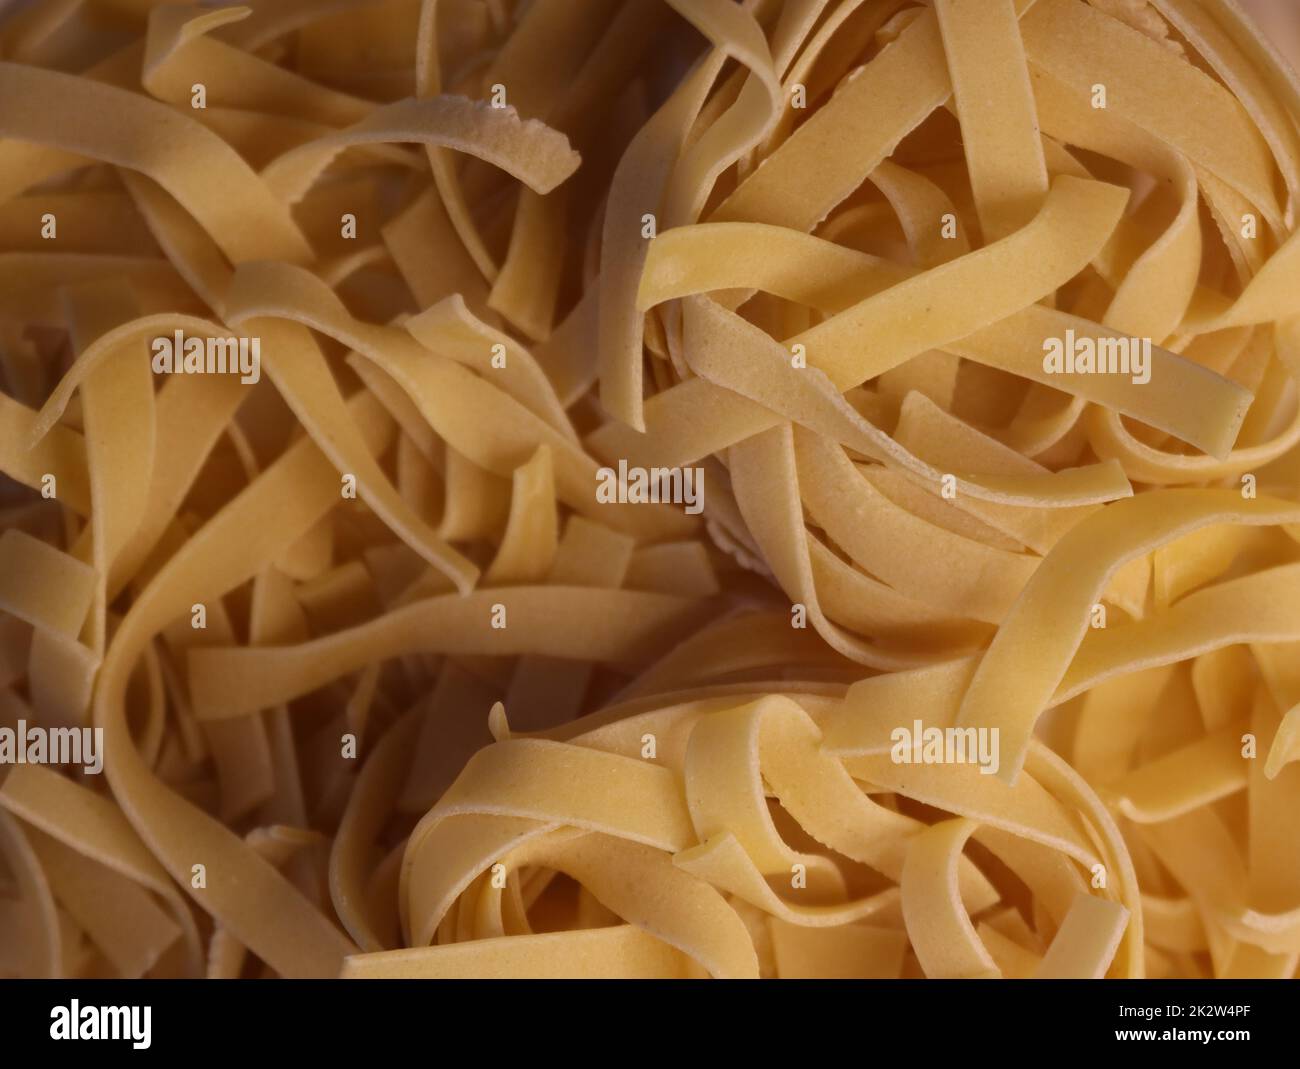 delicious Italian pasta natural food healthy carbohydrates background Stock Photo